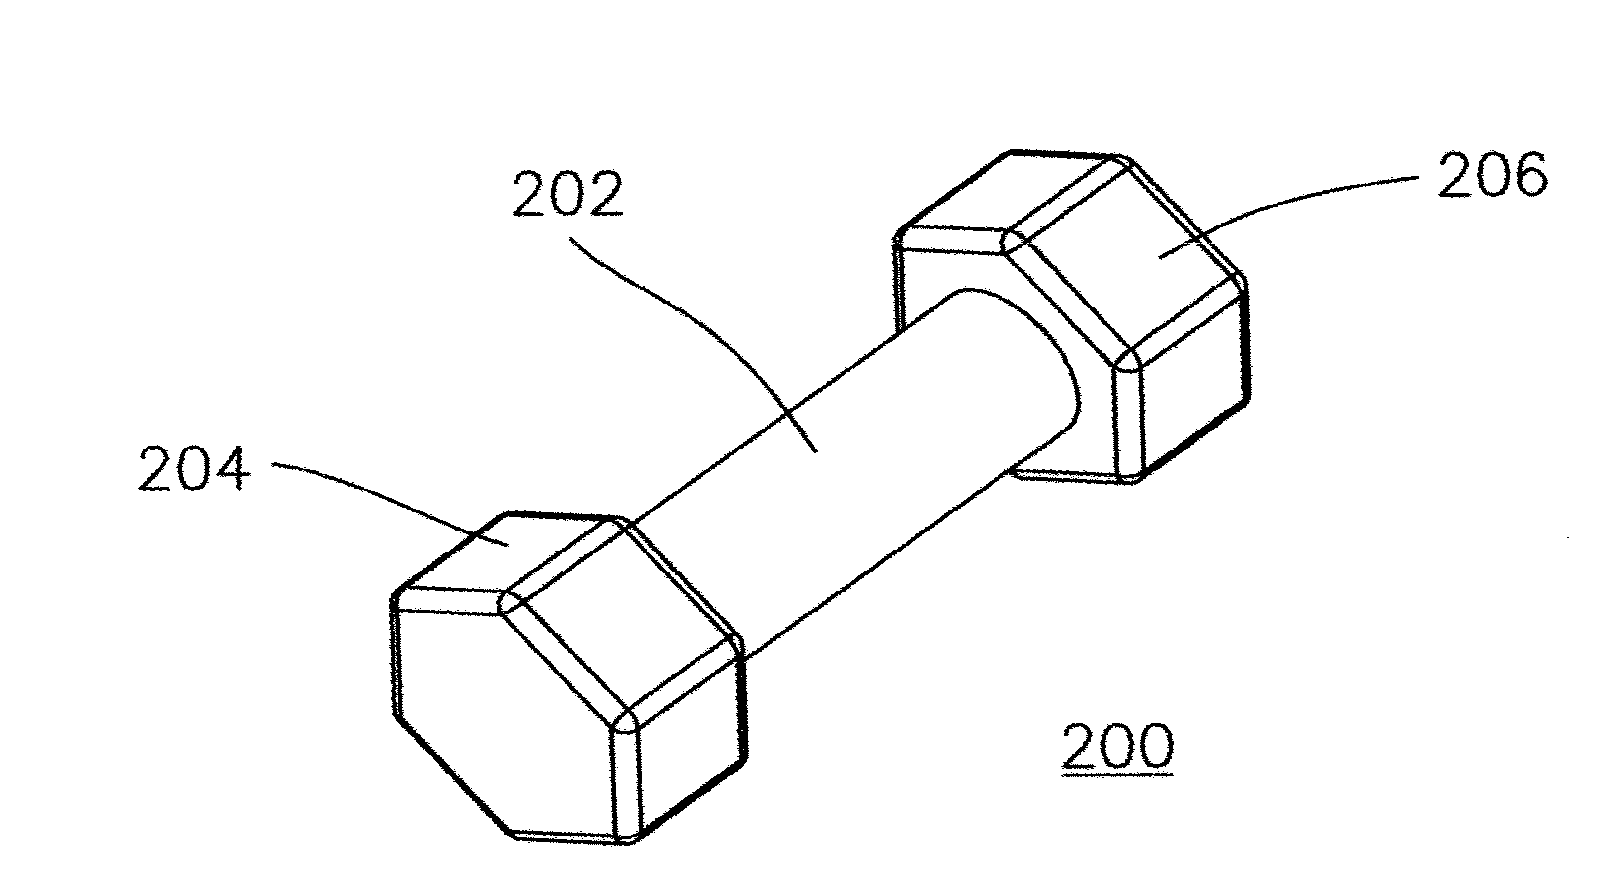 Hygienic exercise equipment and manufacturing method thereof